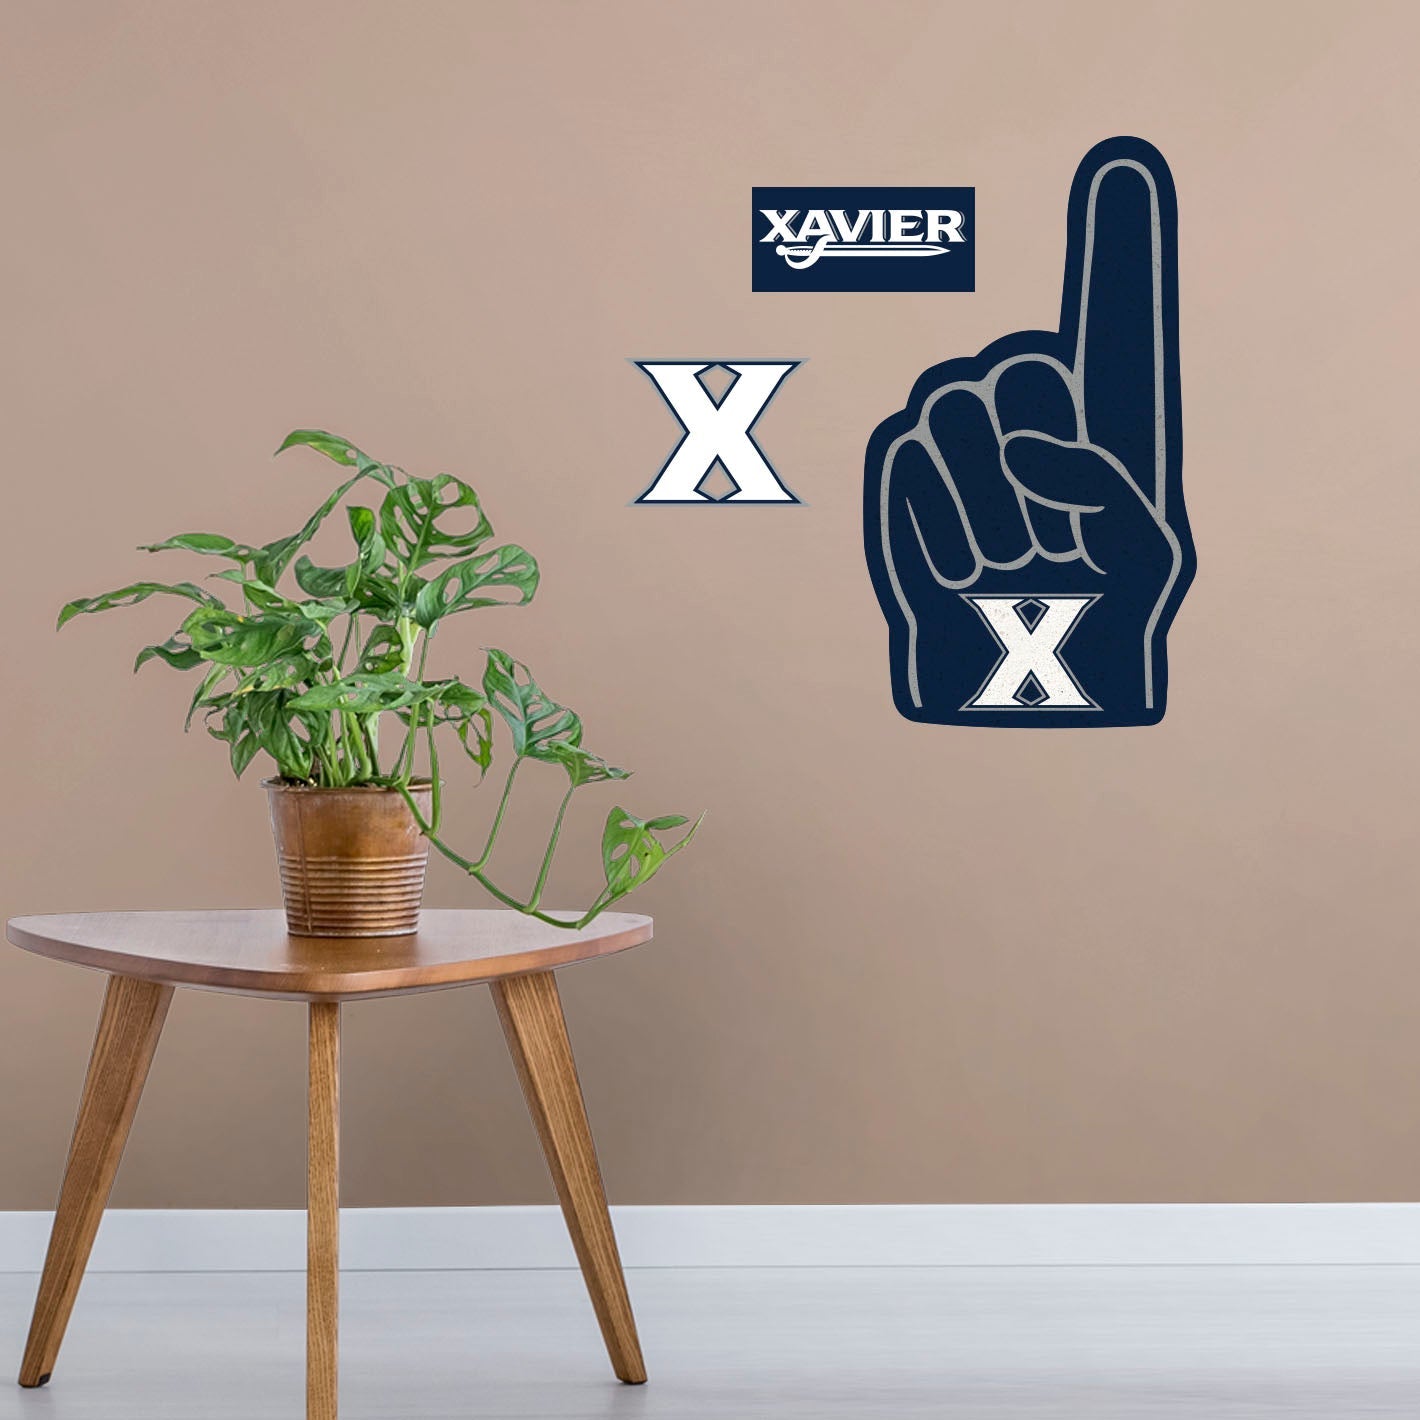 Xavier Musketeers: Foam Finger - Officially Licensed NCAA Removable Adhesive Decal